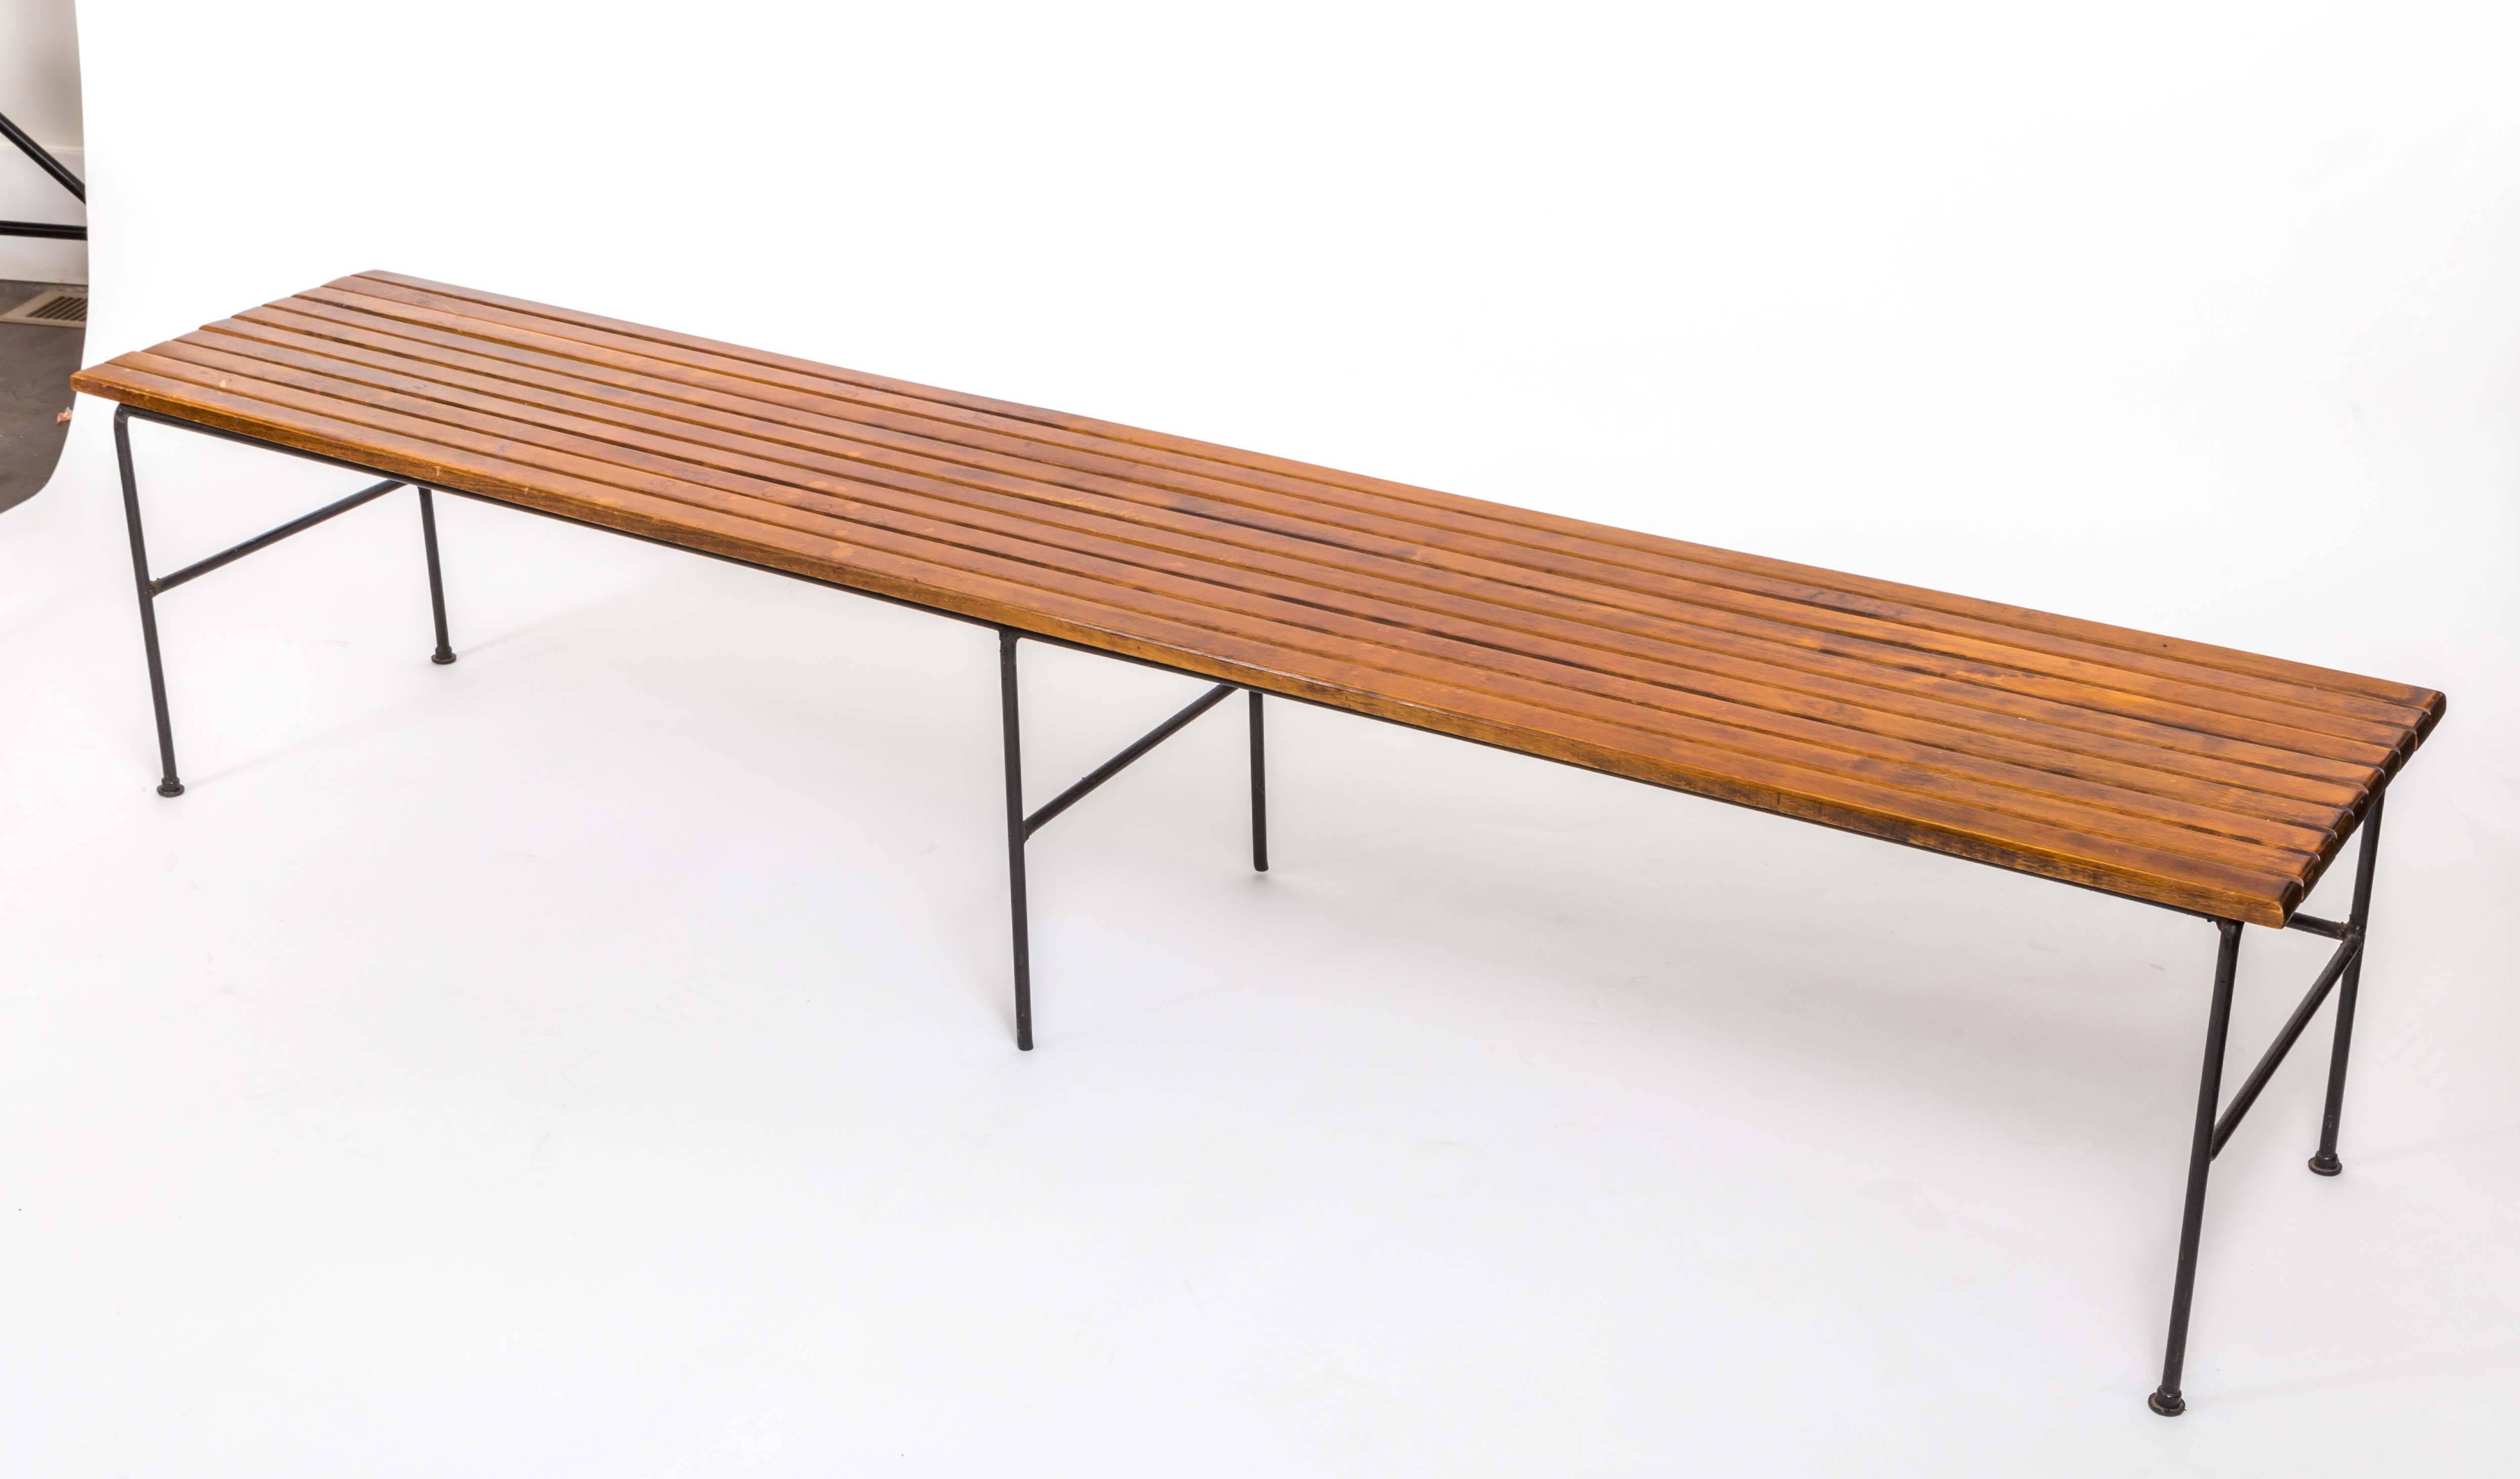 American Wooden Slatted Bench by Arthur Umanoff